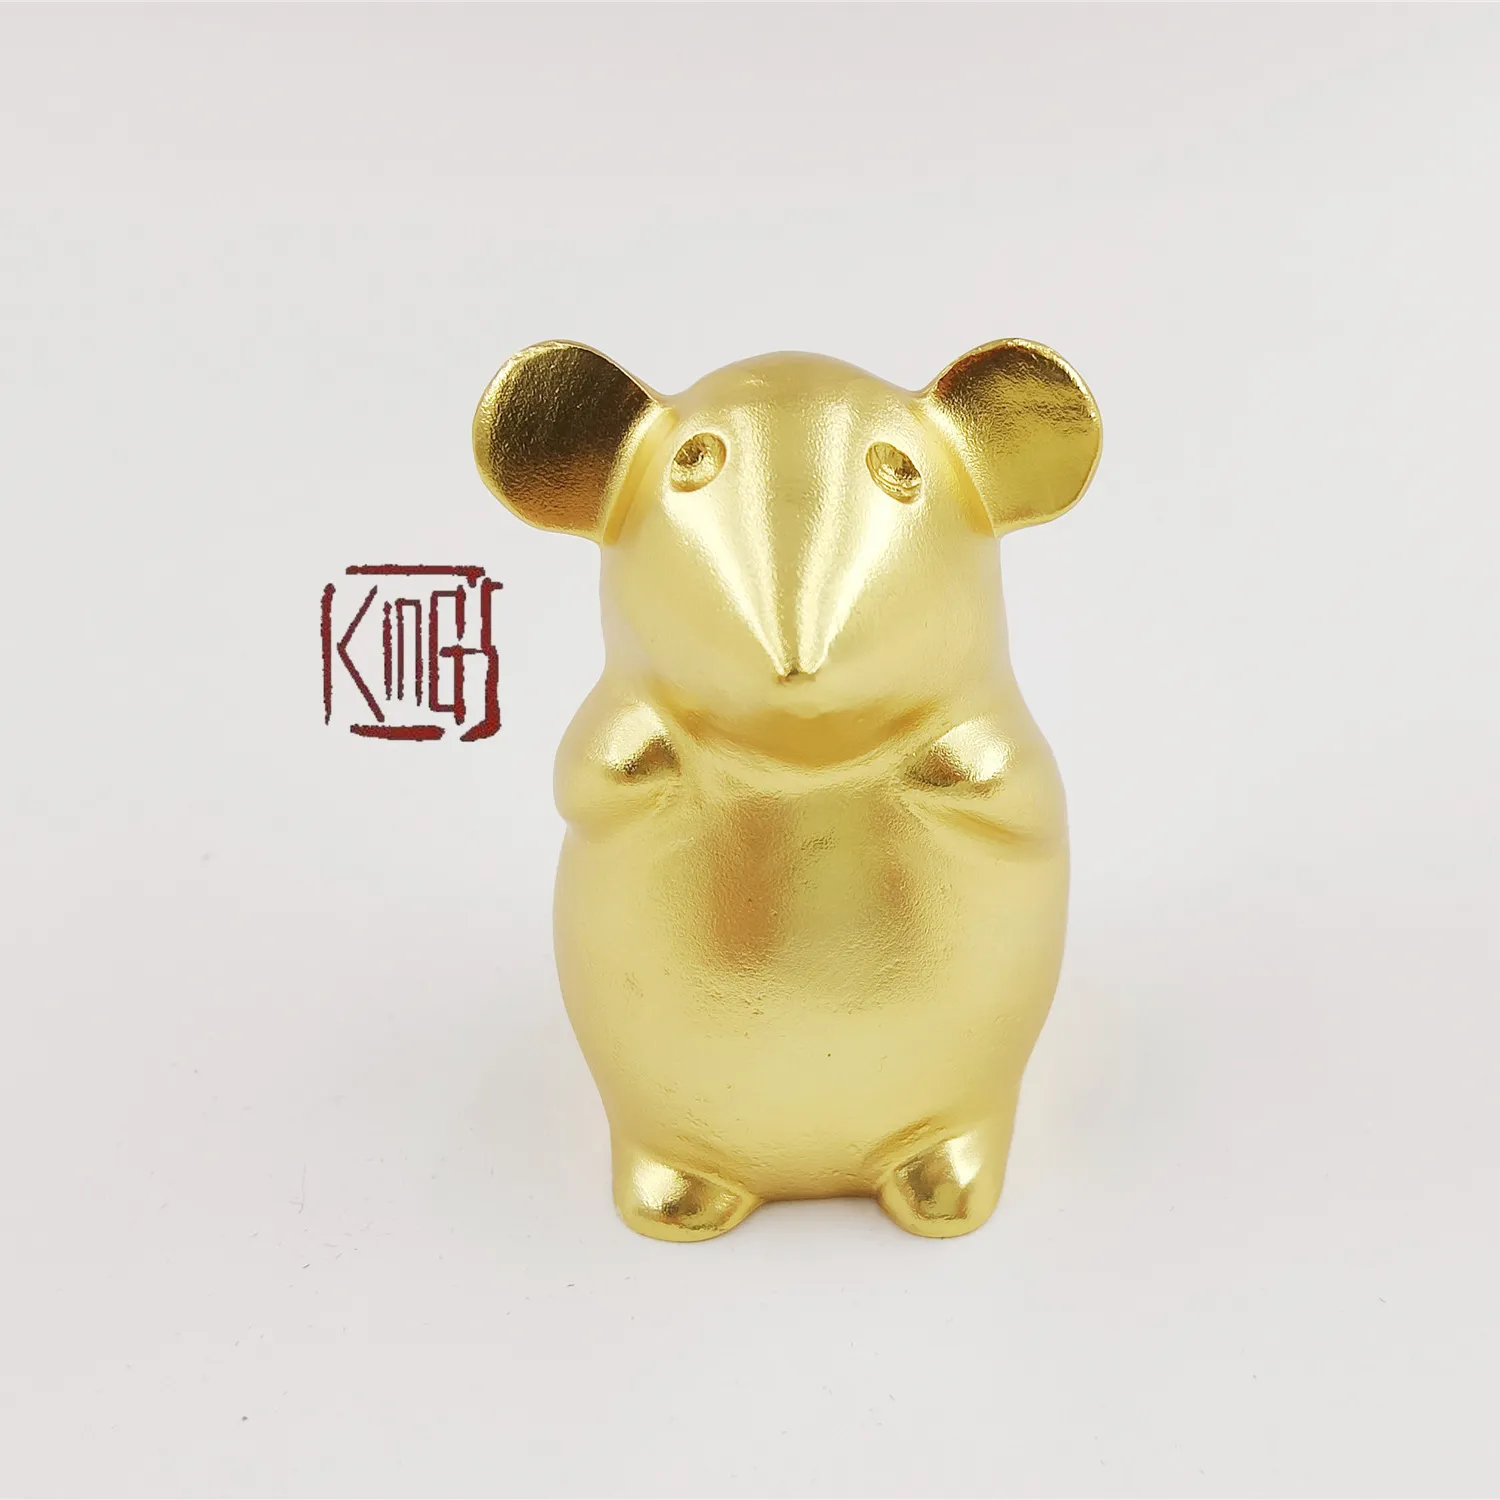 Chinese Zodiac Animal Rat Brass Ornament Golden Colored Home Decoration Gift